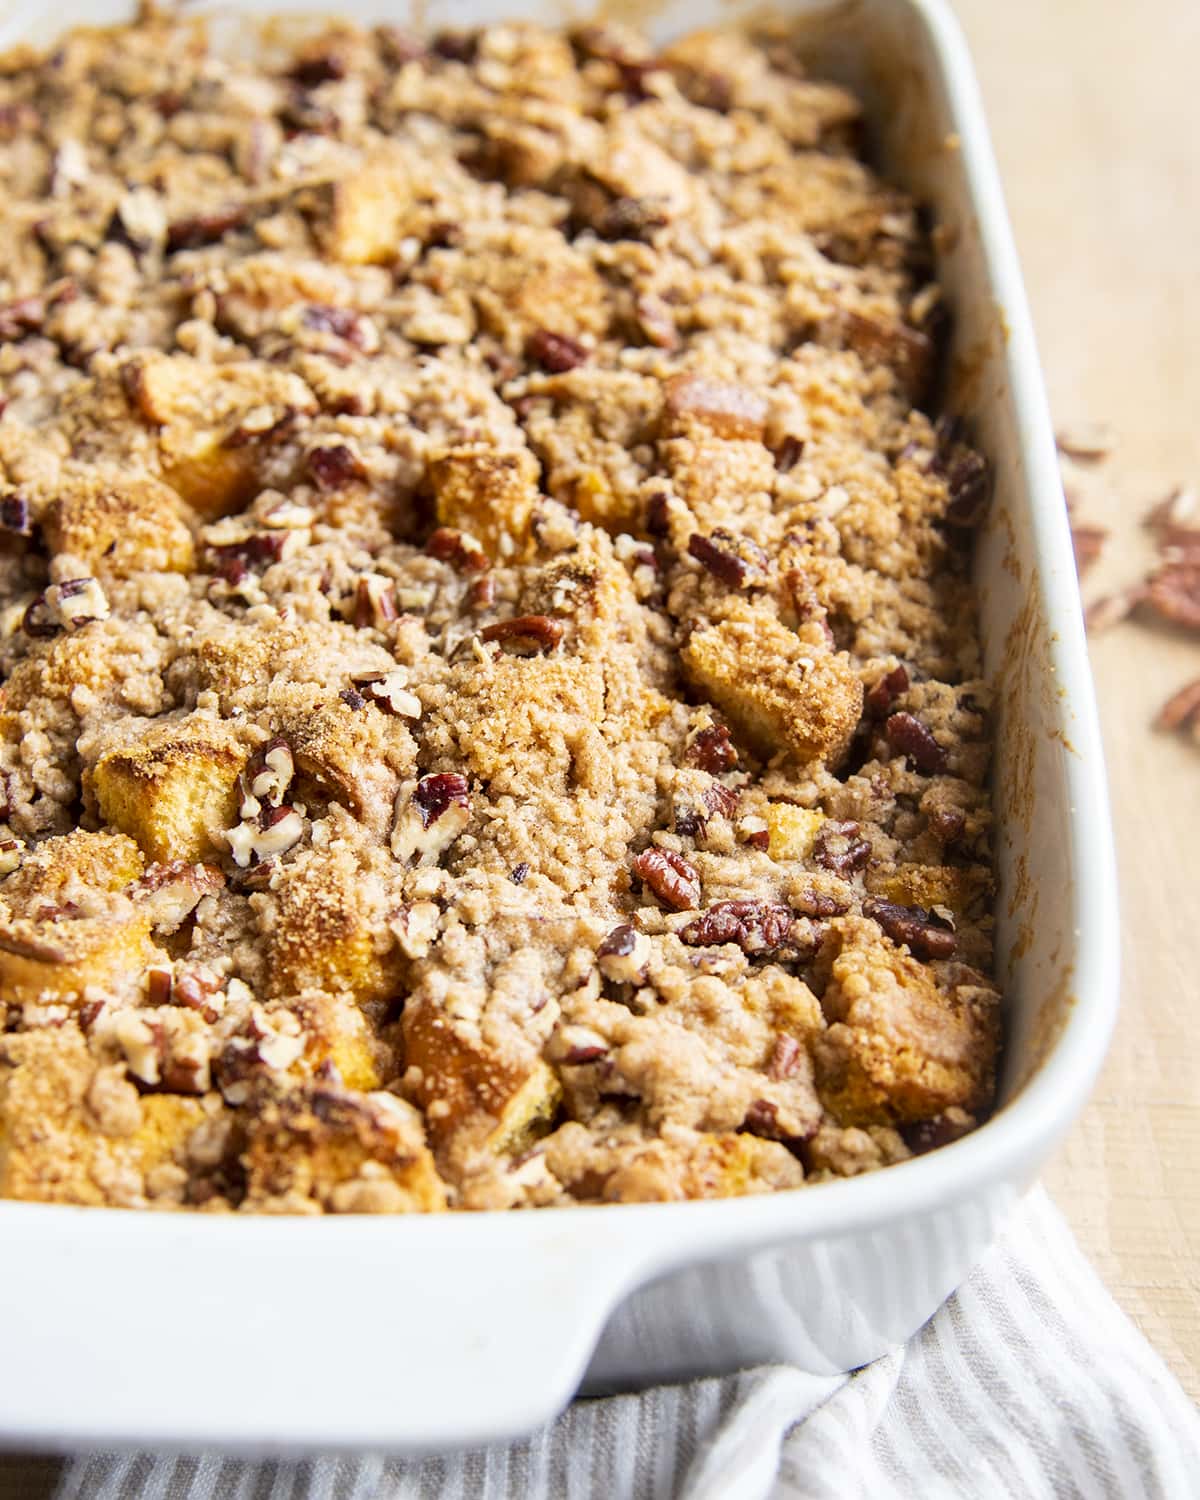 French toast casserole in a baking dish showing just the streusel topping.